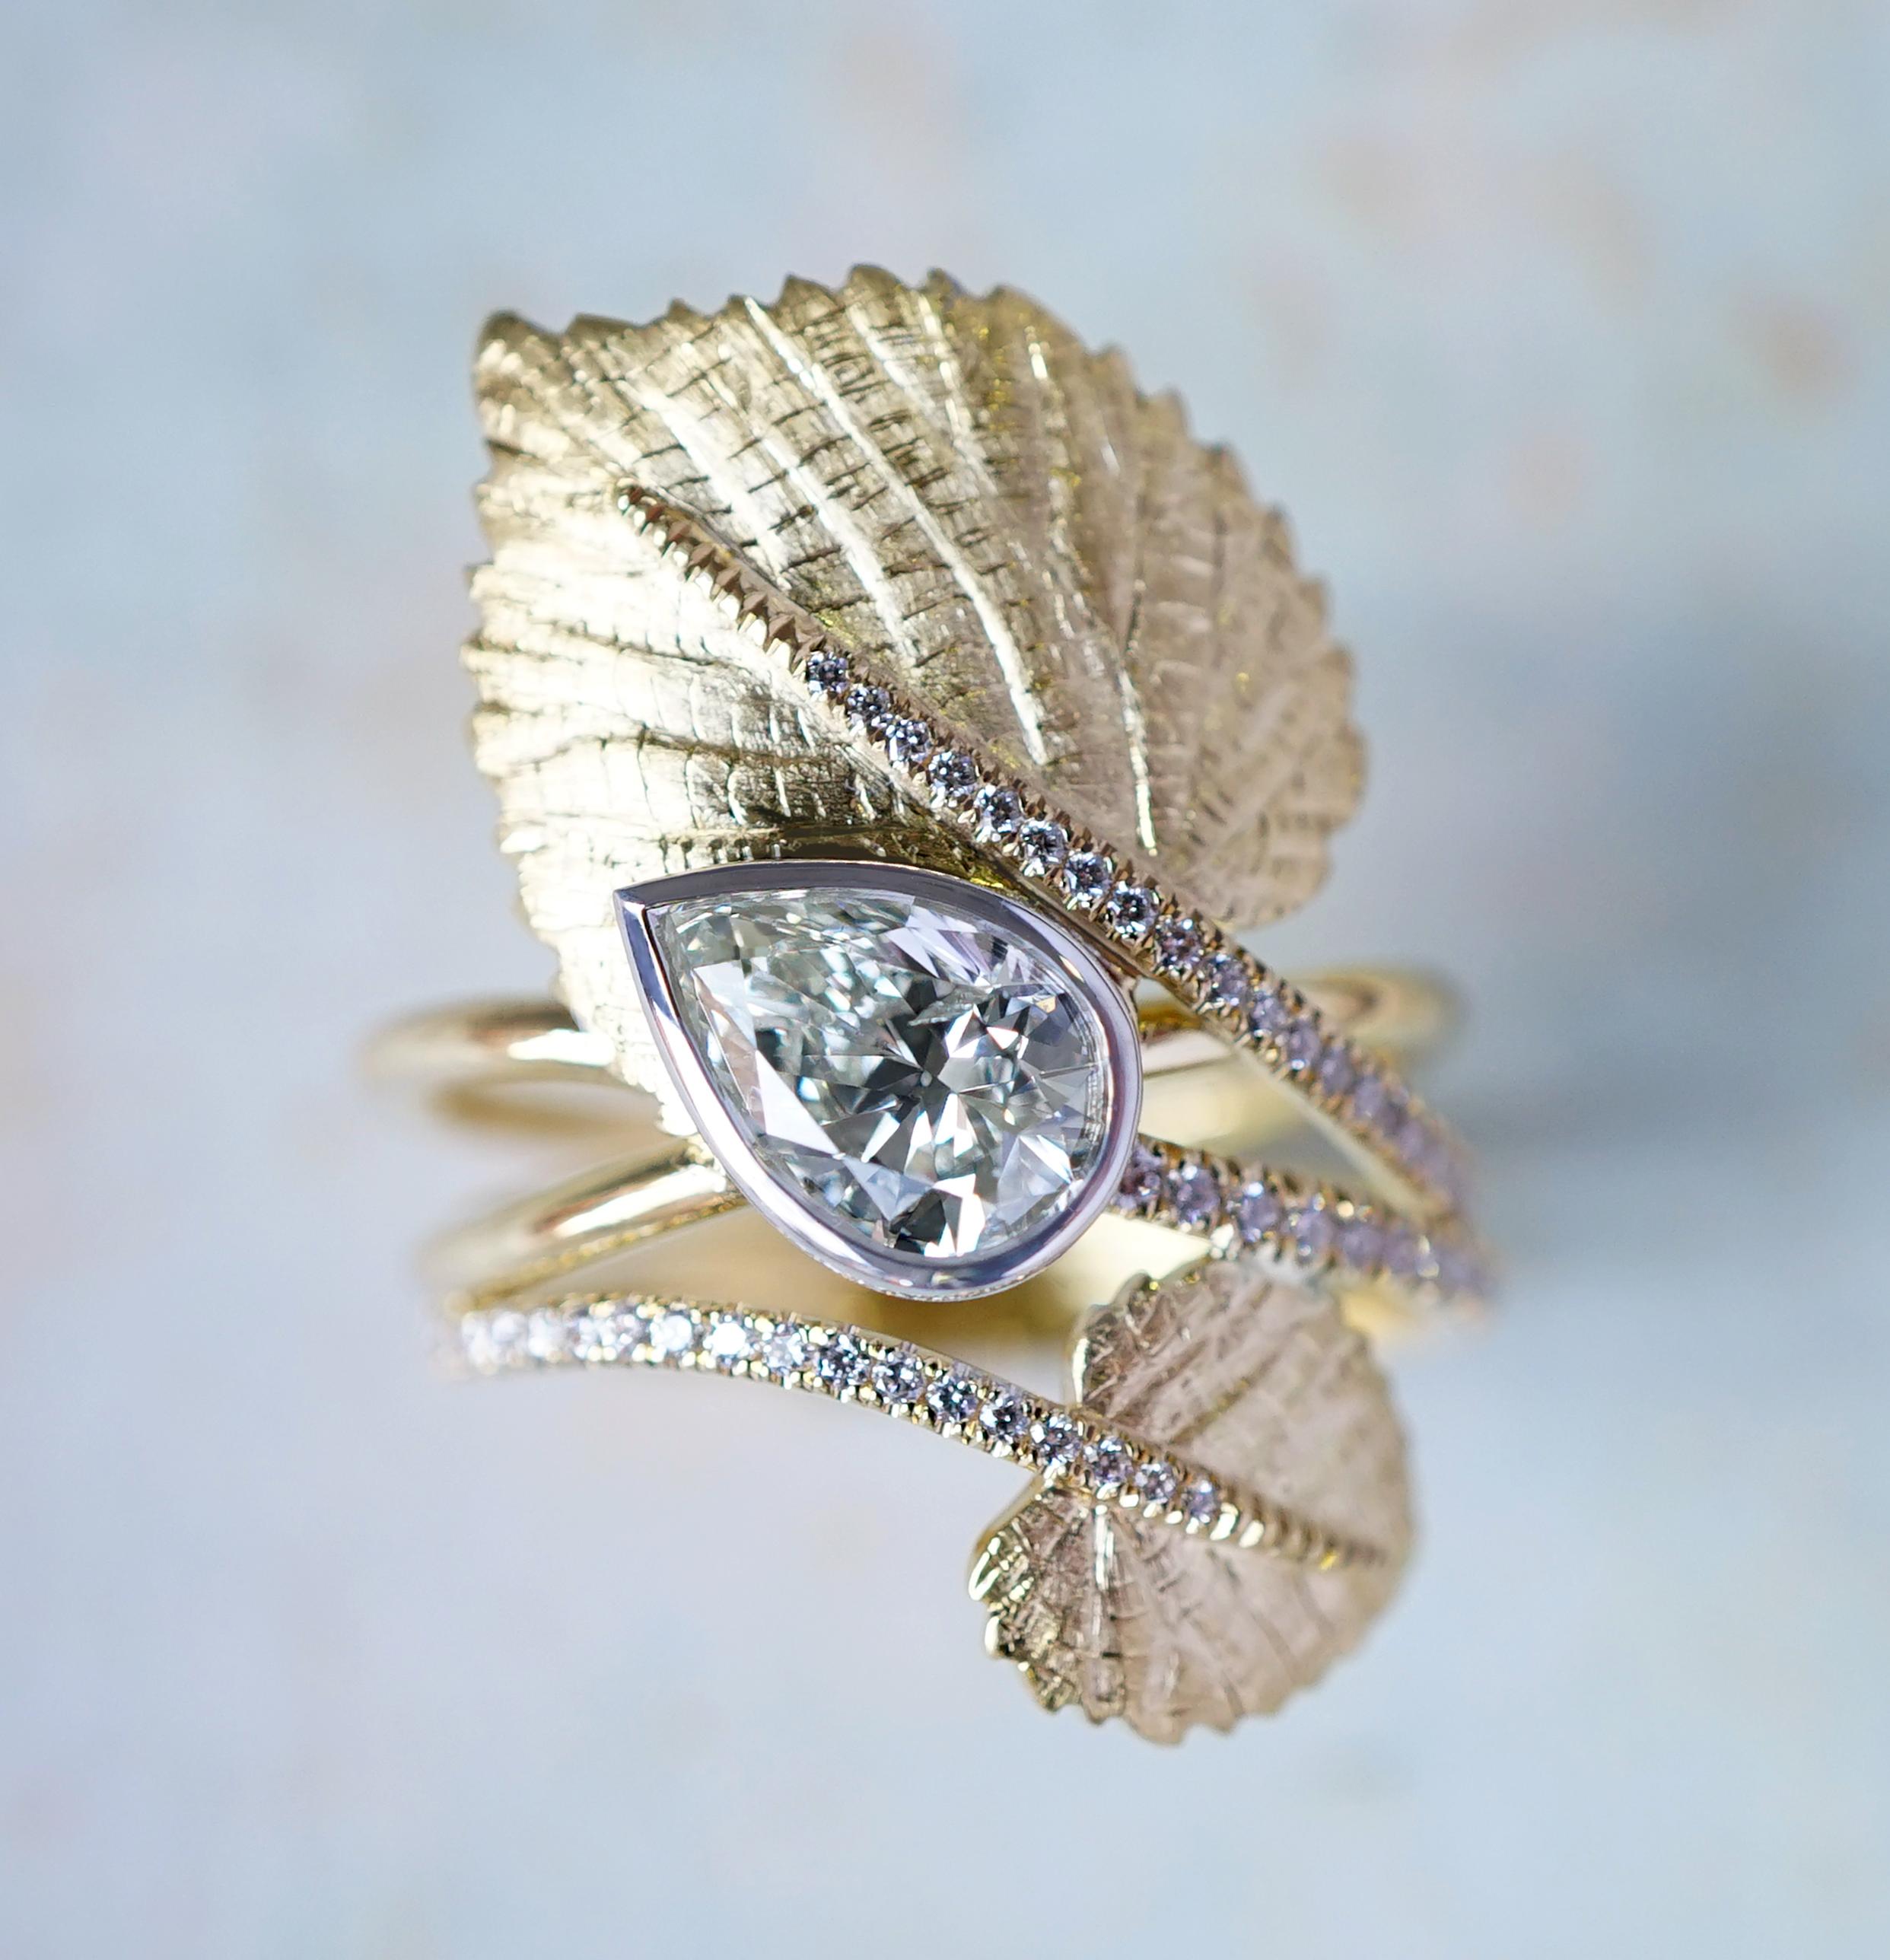 Coralie van Caloens 18k Yellow Gold Botanical Ring And Pear Shaped Diamond is entirely hand made and forged in Belgium by experts goldsmiths therefore it is a very unique piece. The ring is very organic with the hand engraved linden leaves wrapping